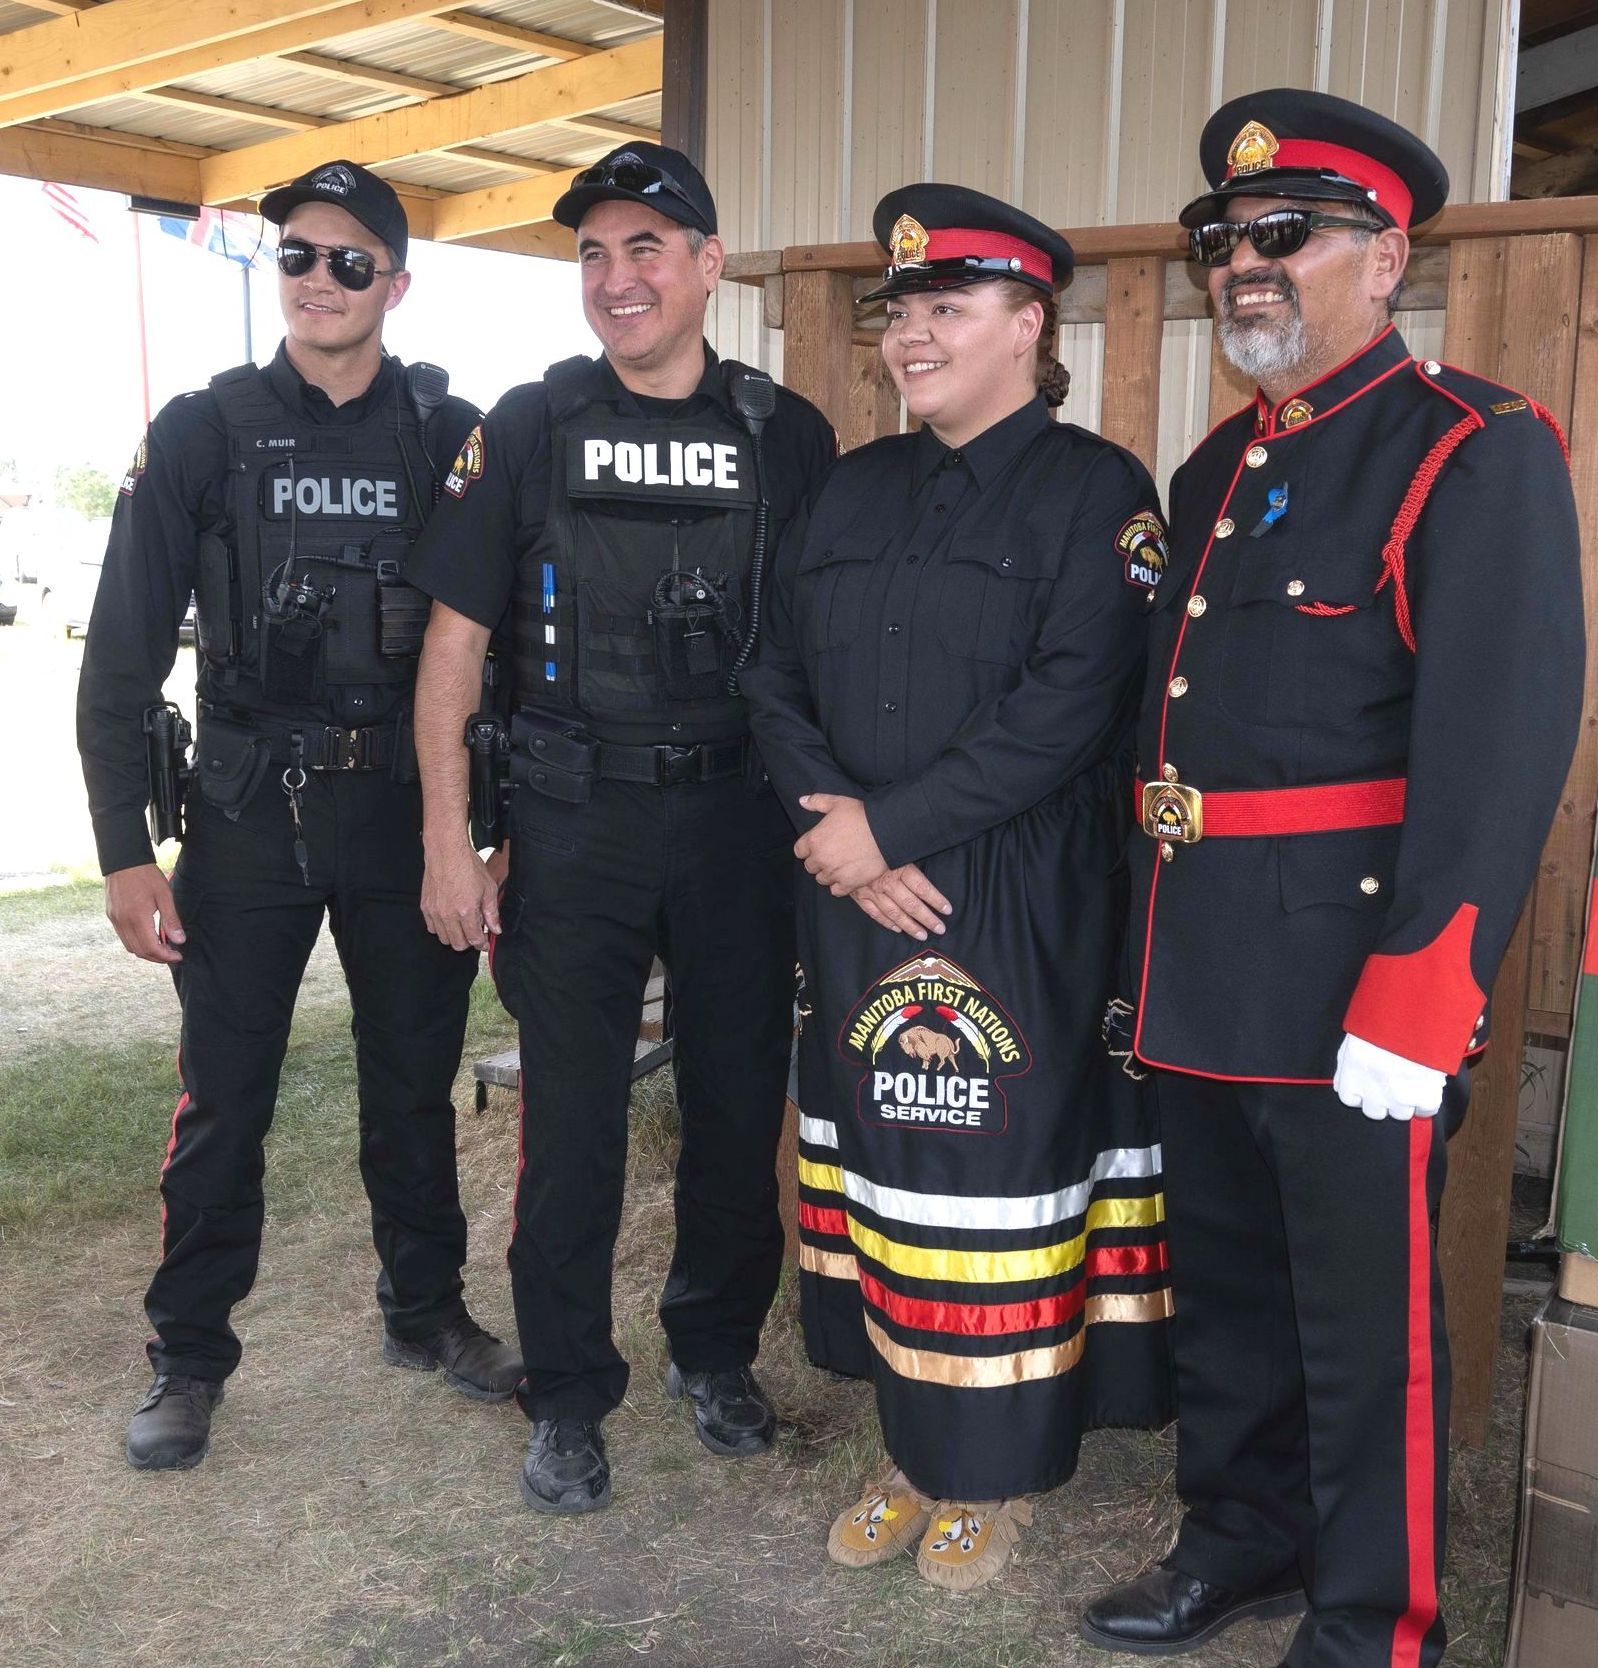 MFNPS-Manitoba First Nations Police Service - 4 officers